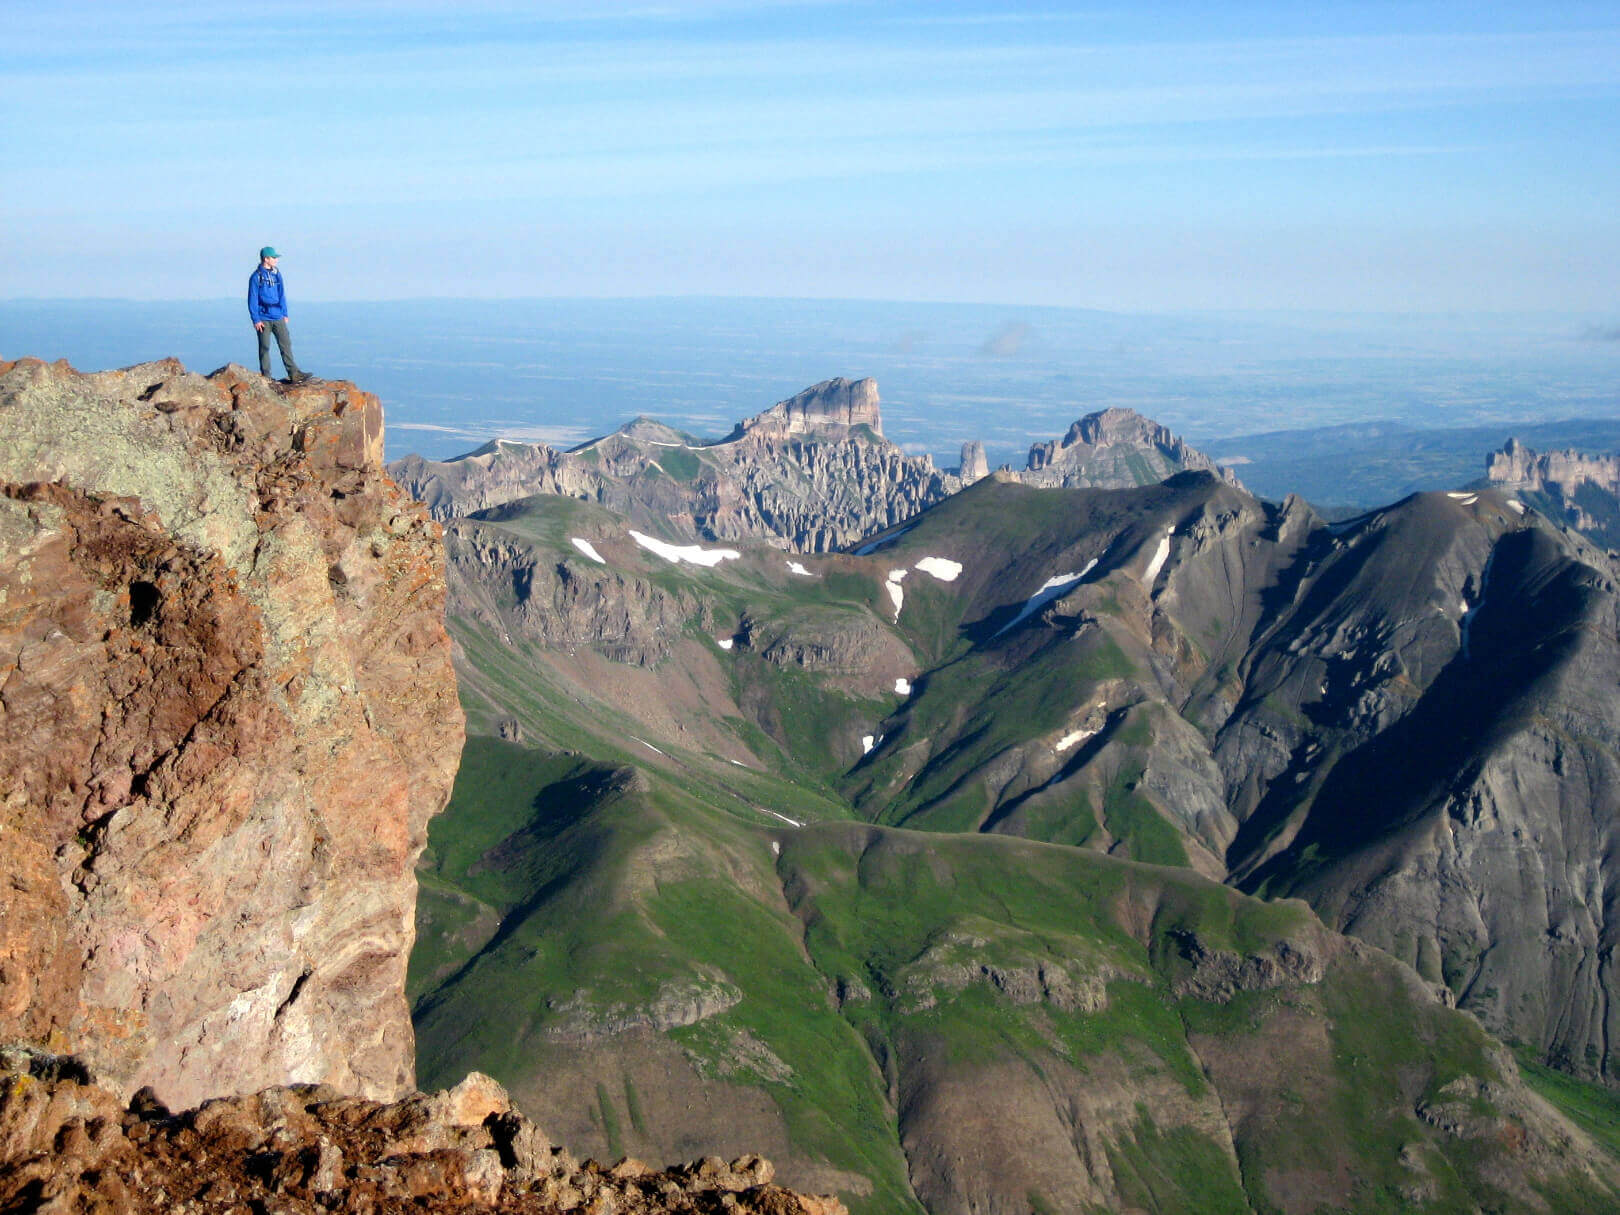 A man standing on the edge of a mountain